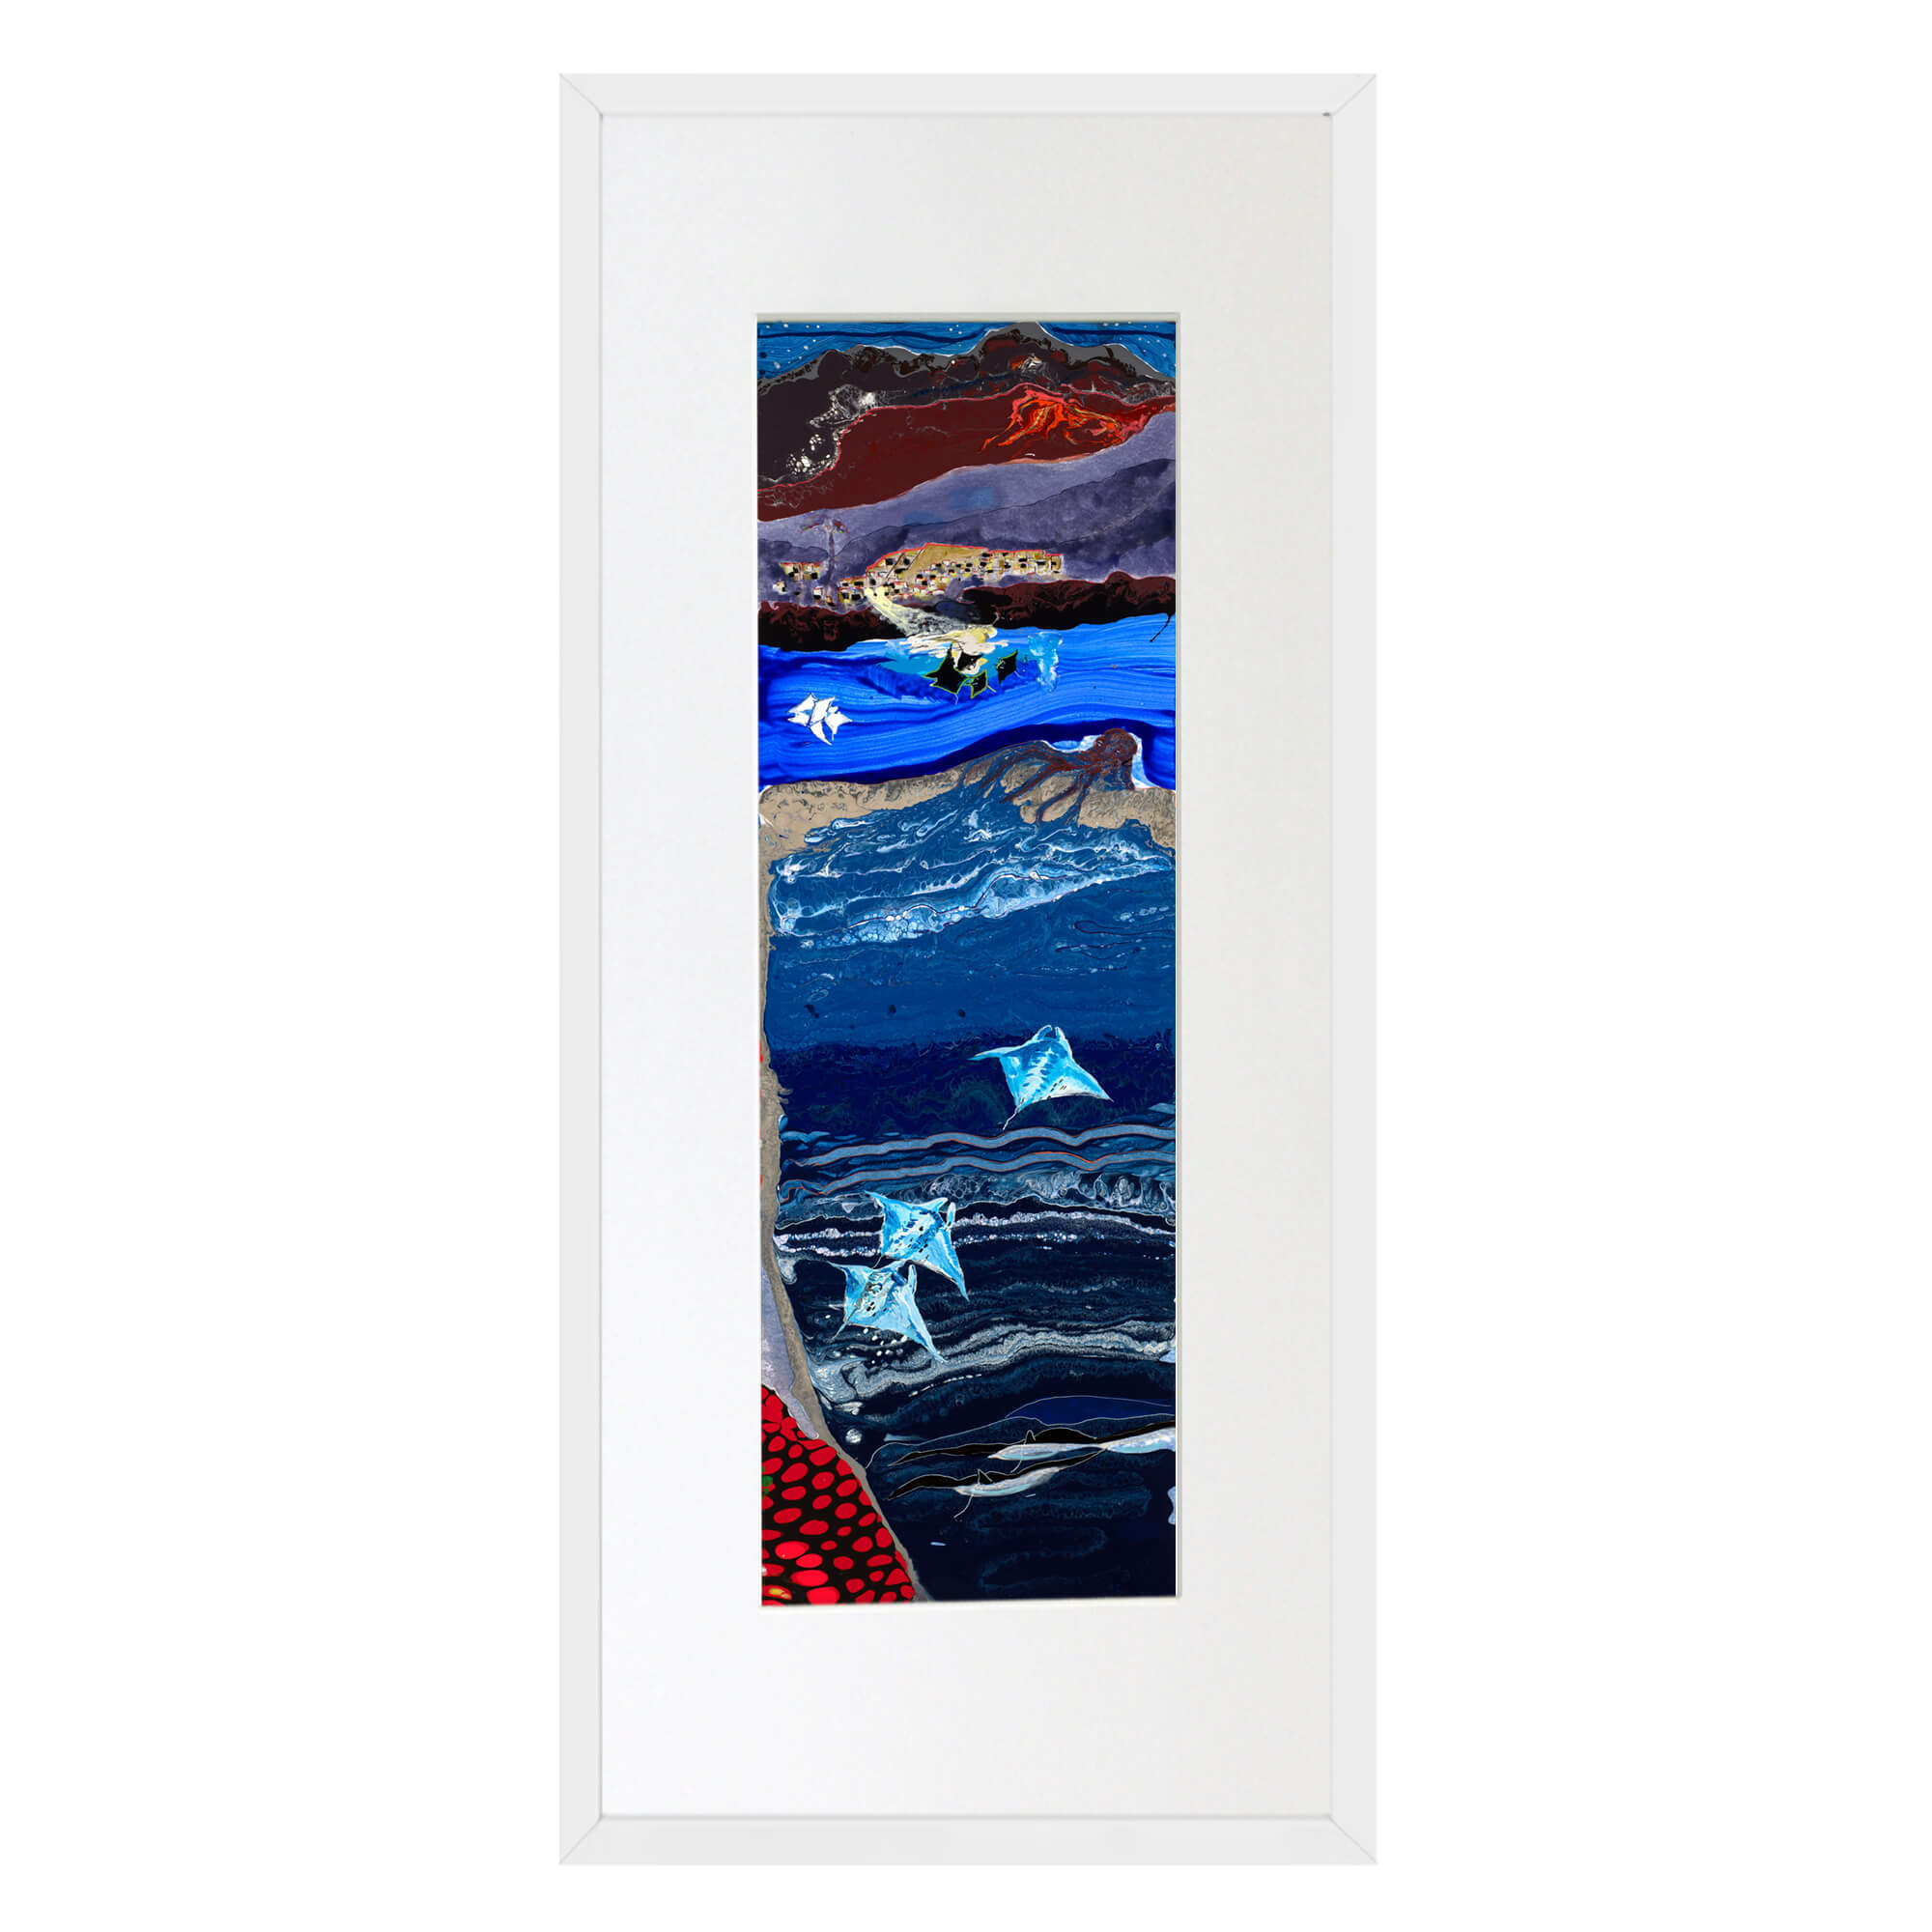 Matted art print with white frame showcasing the interplay of light and shadow by hawaii artist robert hazzard